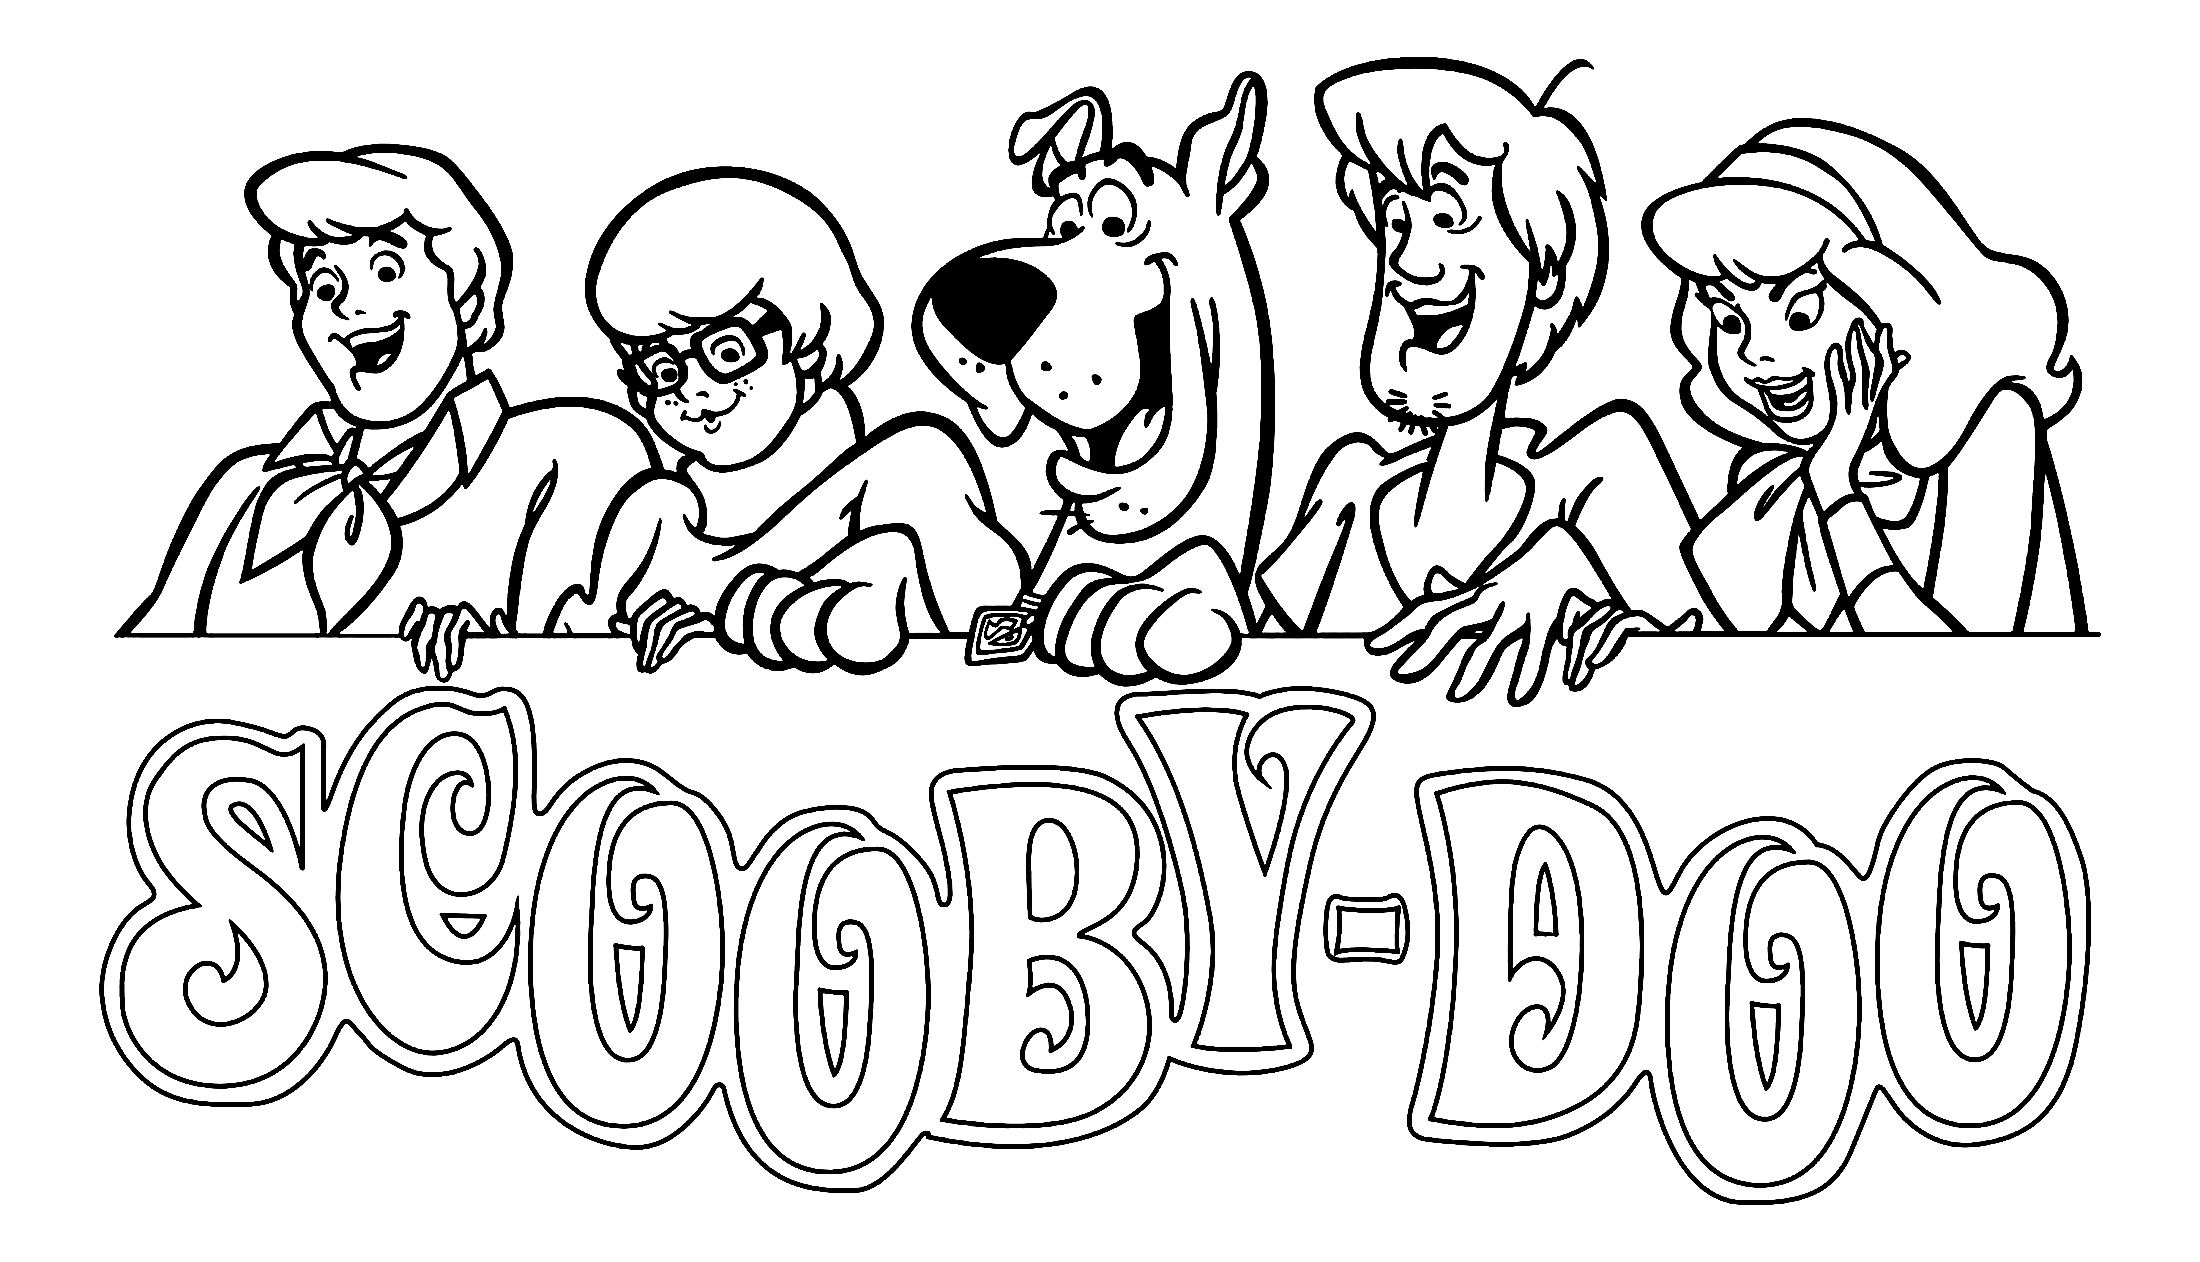 Scooby Doo All Characters Easy Coloring Page for Kids